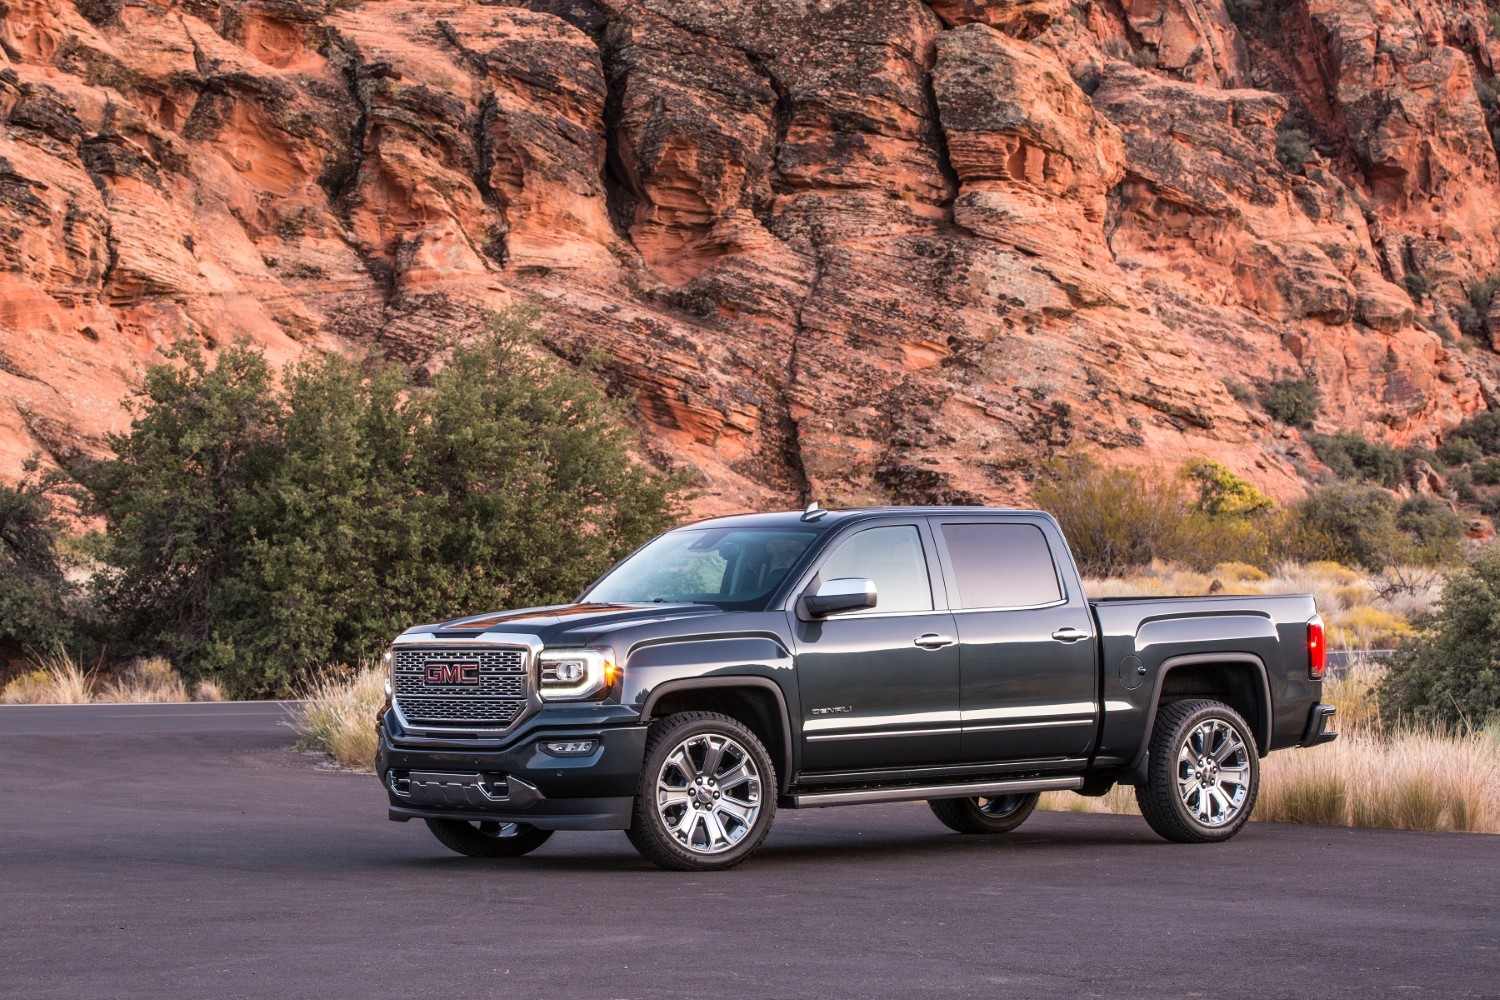 2018 Gmc Sierra 1500 Crew Cab Specs Review And Pricing Carsession